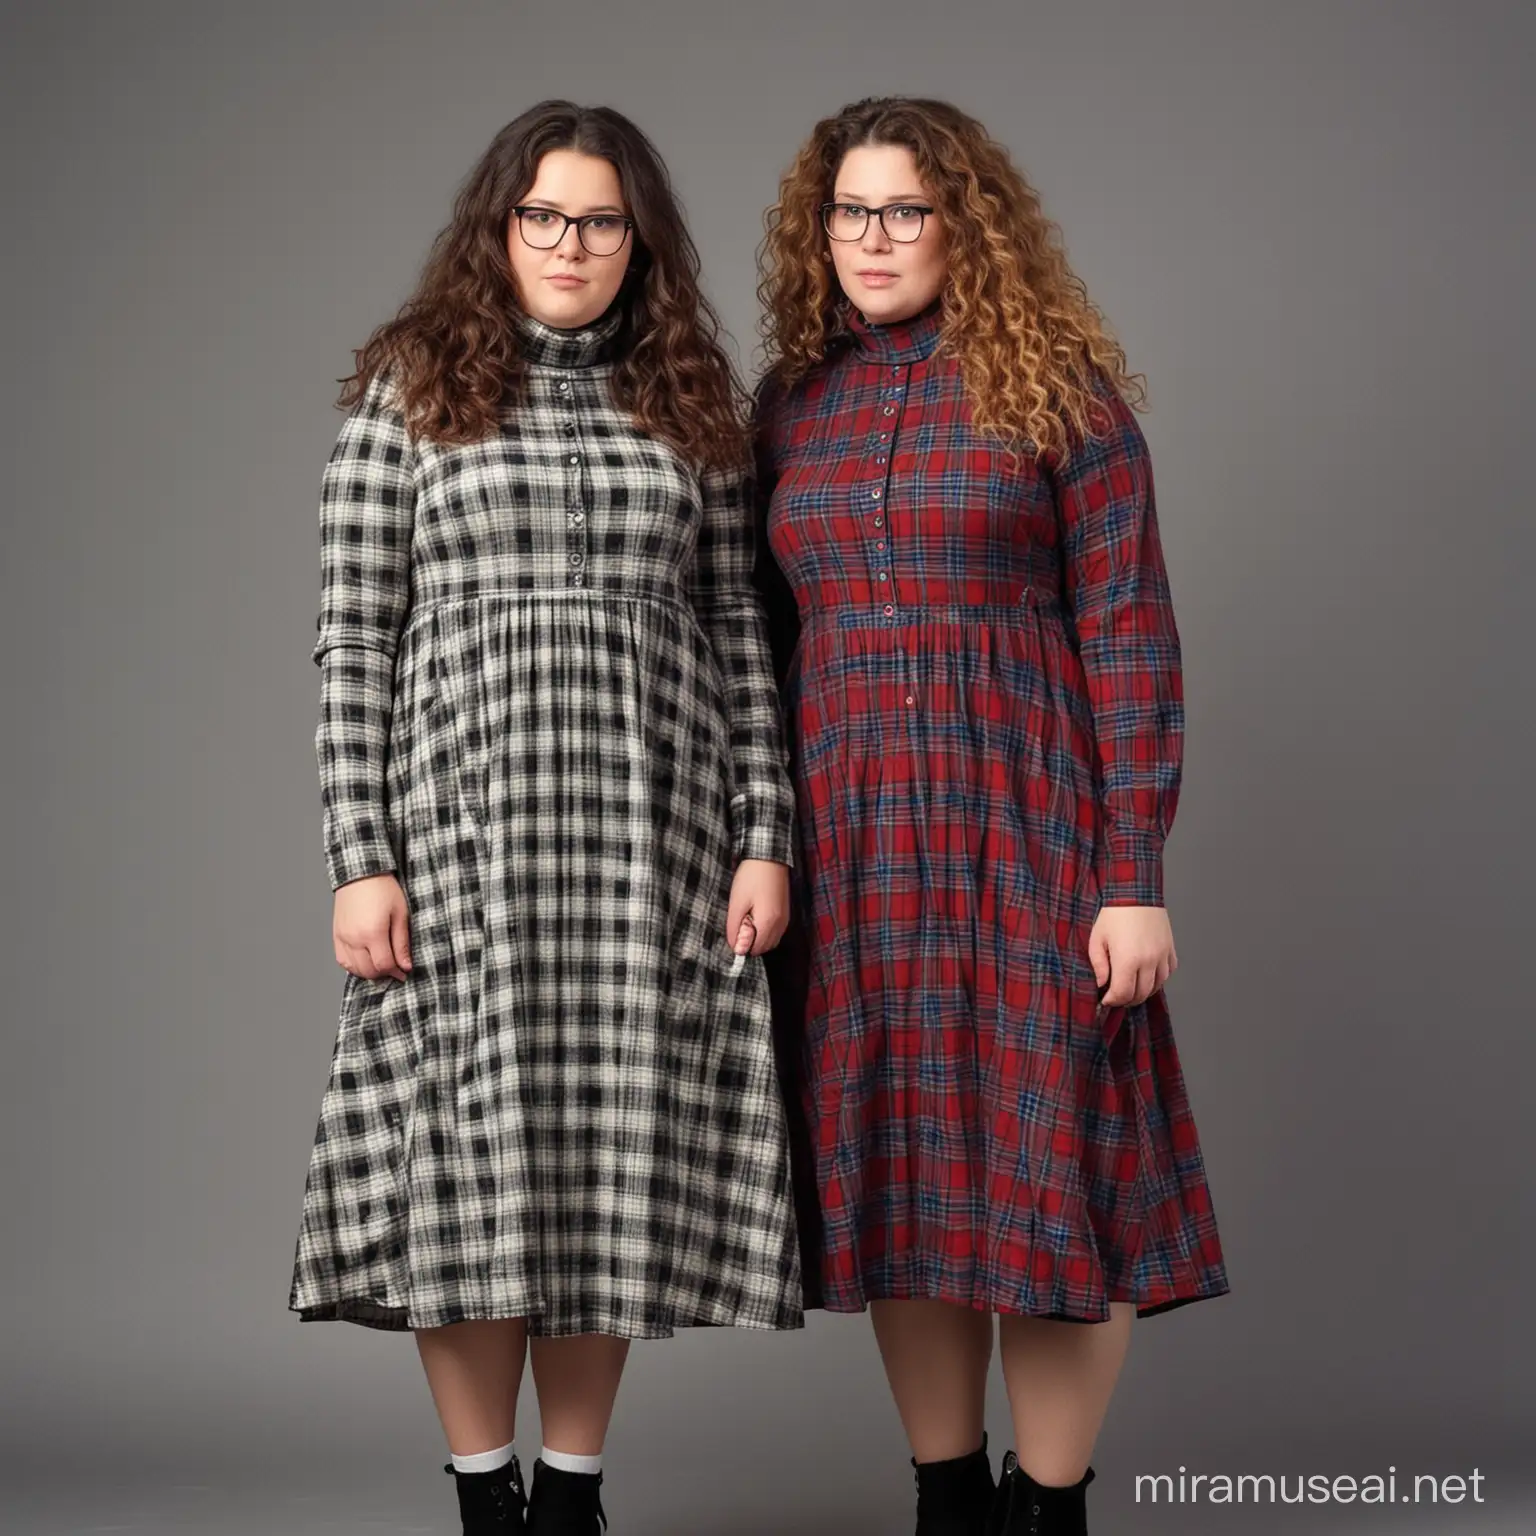 MiddleAged Female Nerds in Plaid Dresses